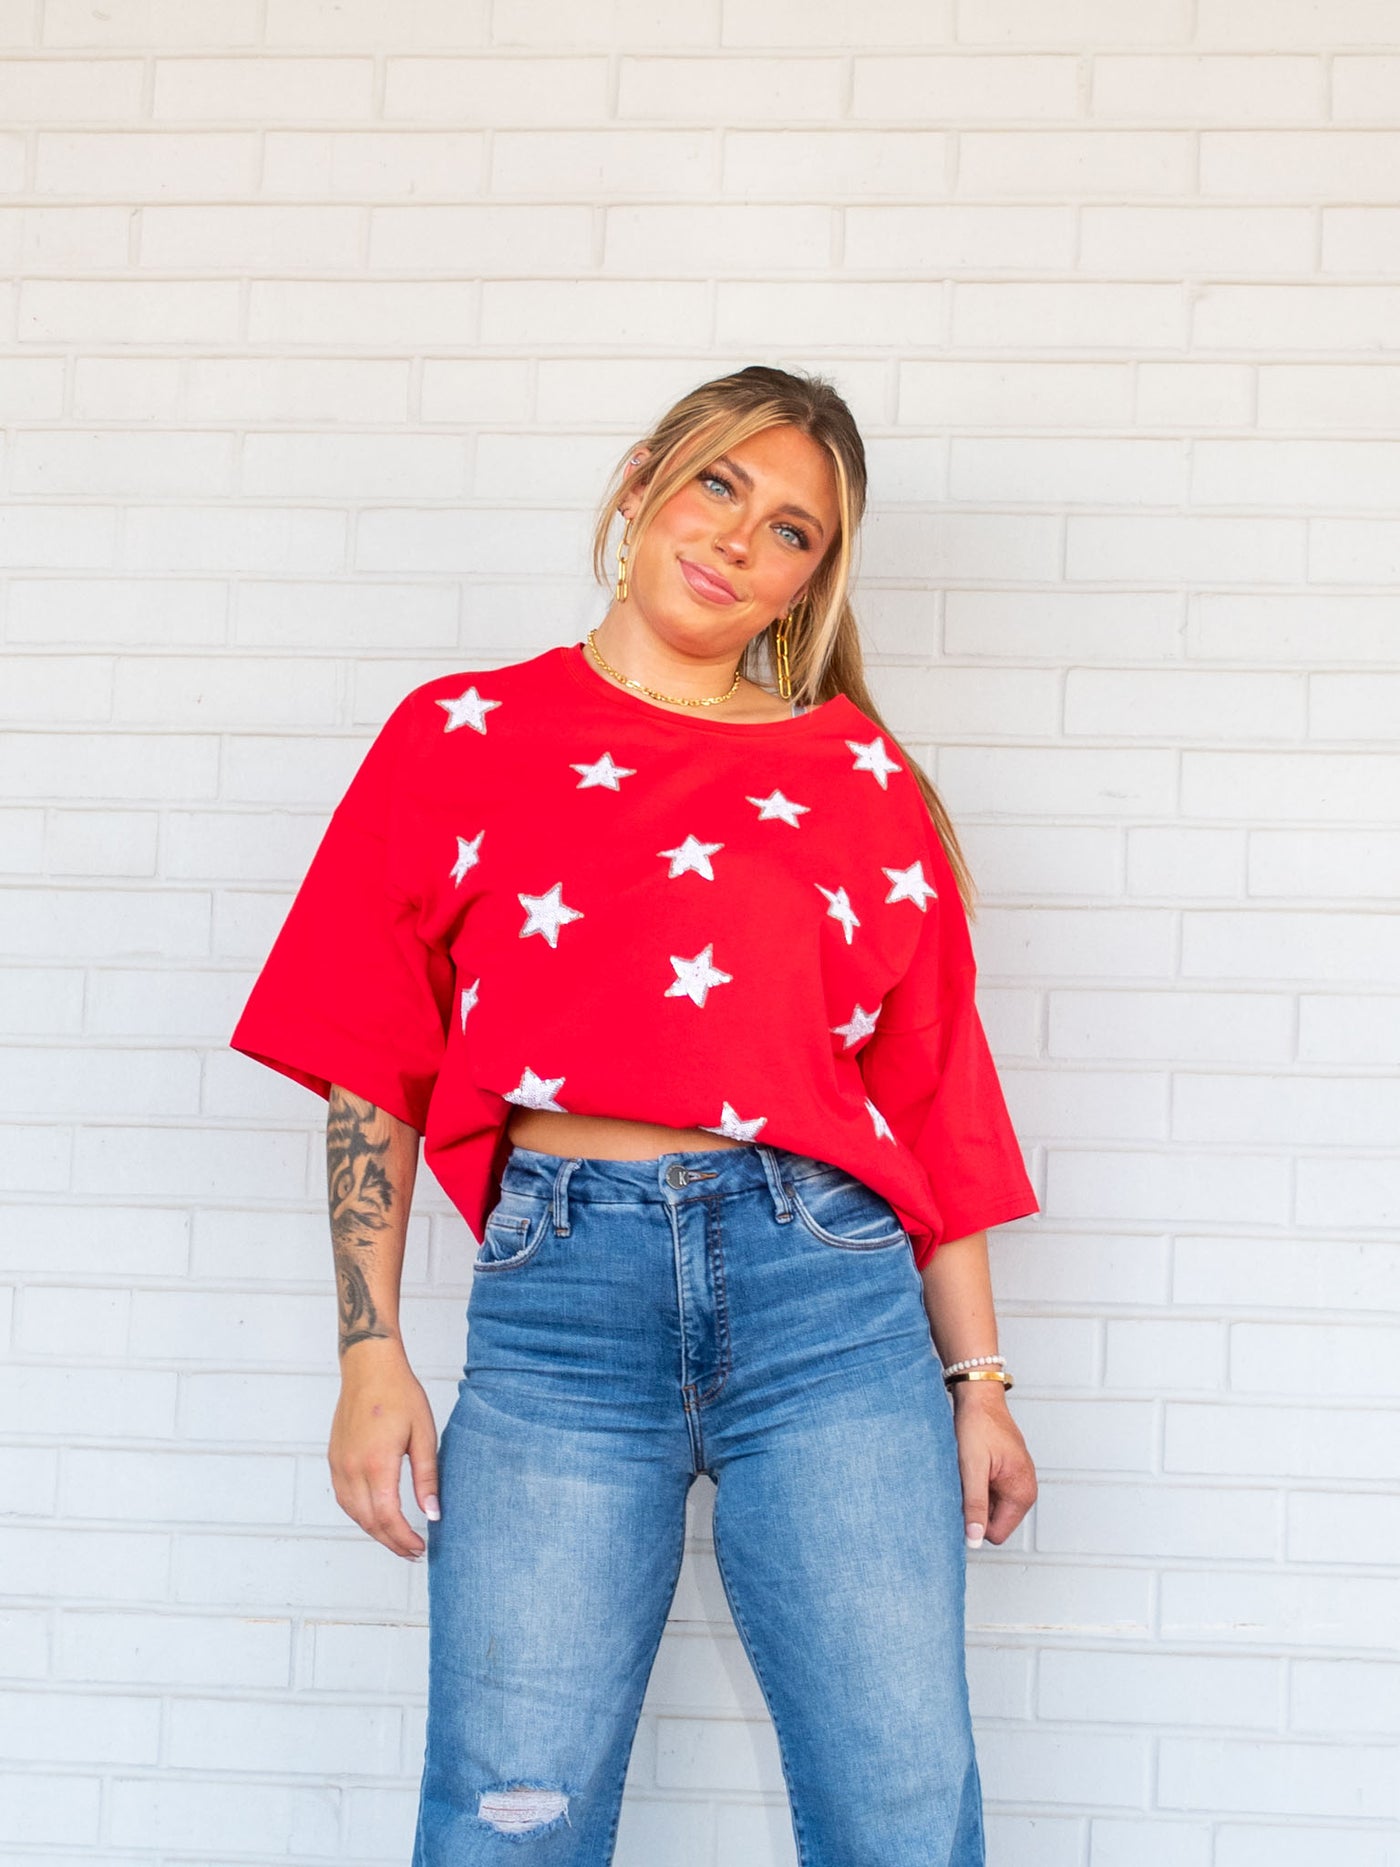 A model wearing an oversized, red tee with white sequin stars all over it. She has it paired with a light wash jean.